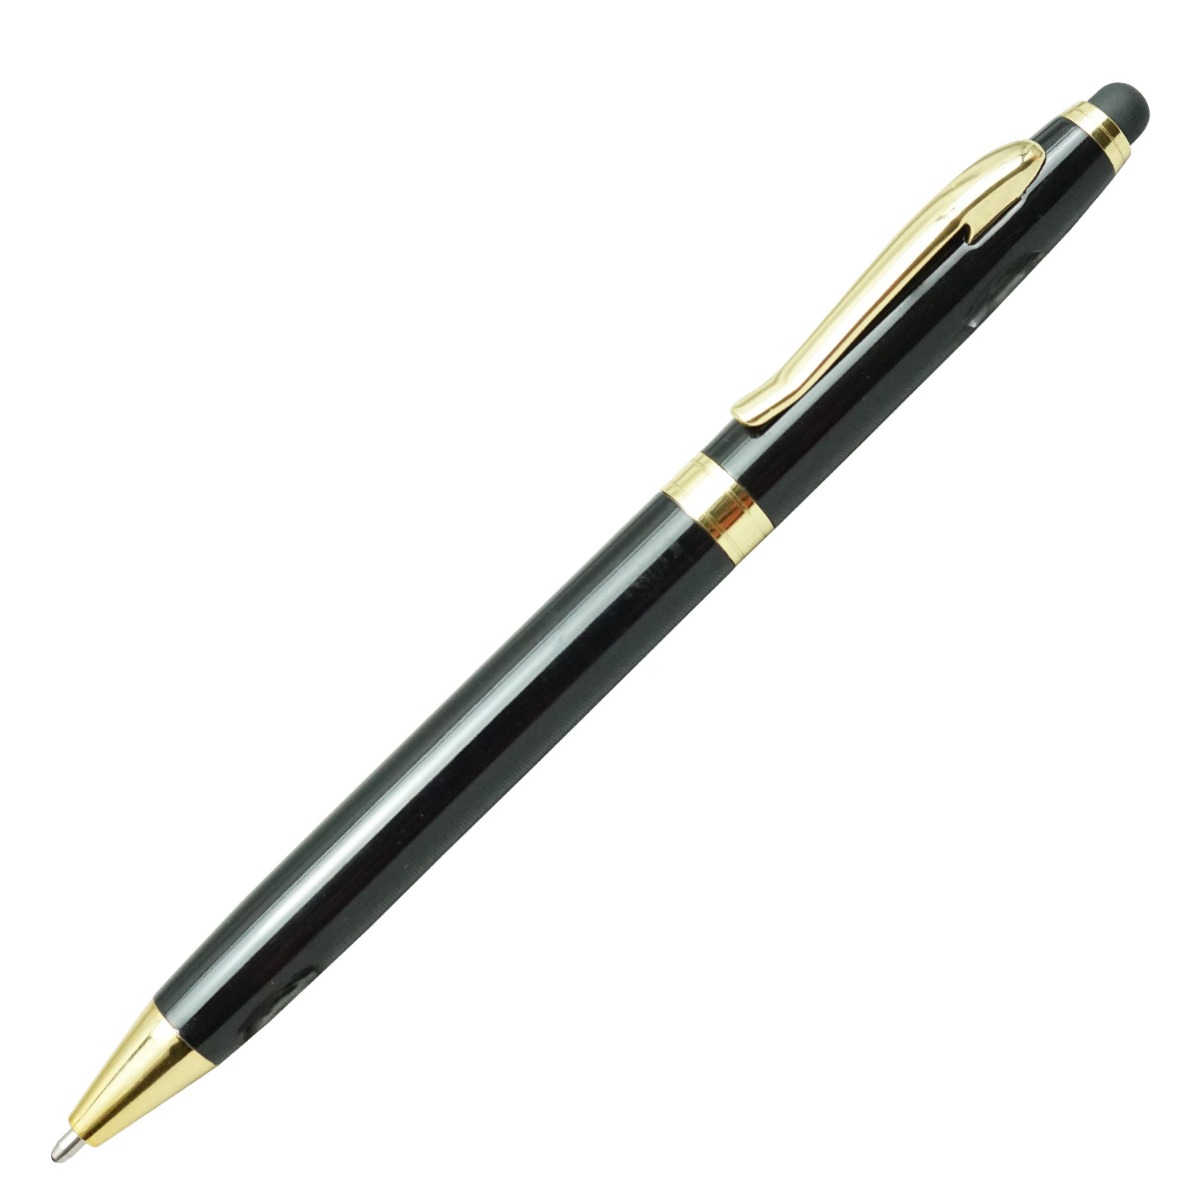 Penhouse Model :16222 Slim Type Glossy Black   Color Body With Gold Clip  and Stylus On Top Twist Type Medium Tip Ball  Pen